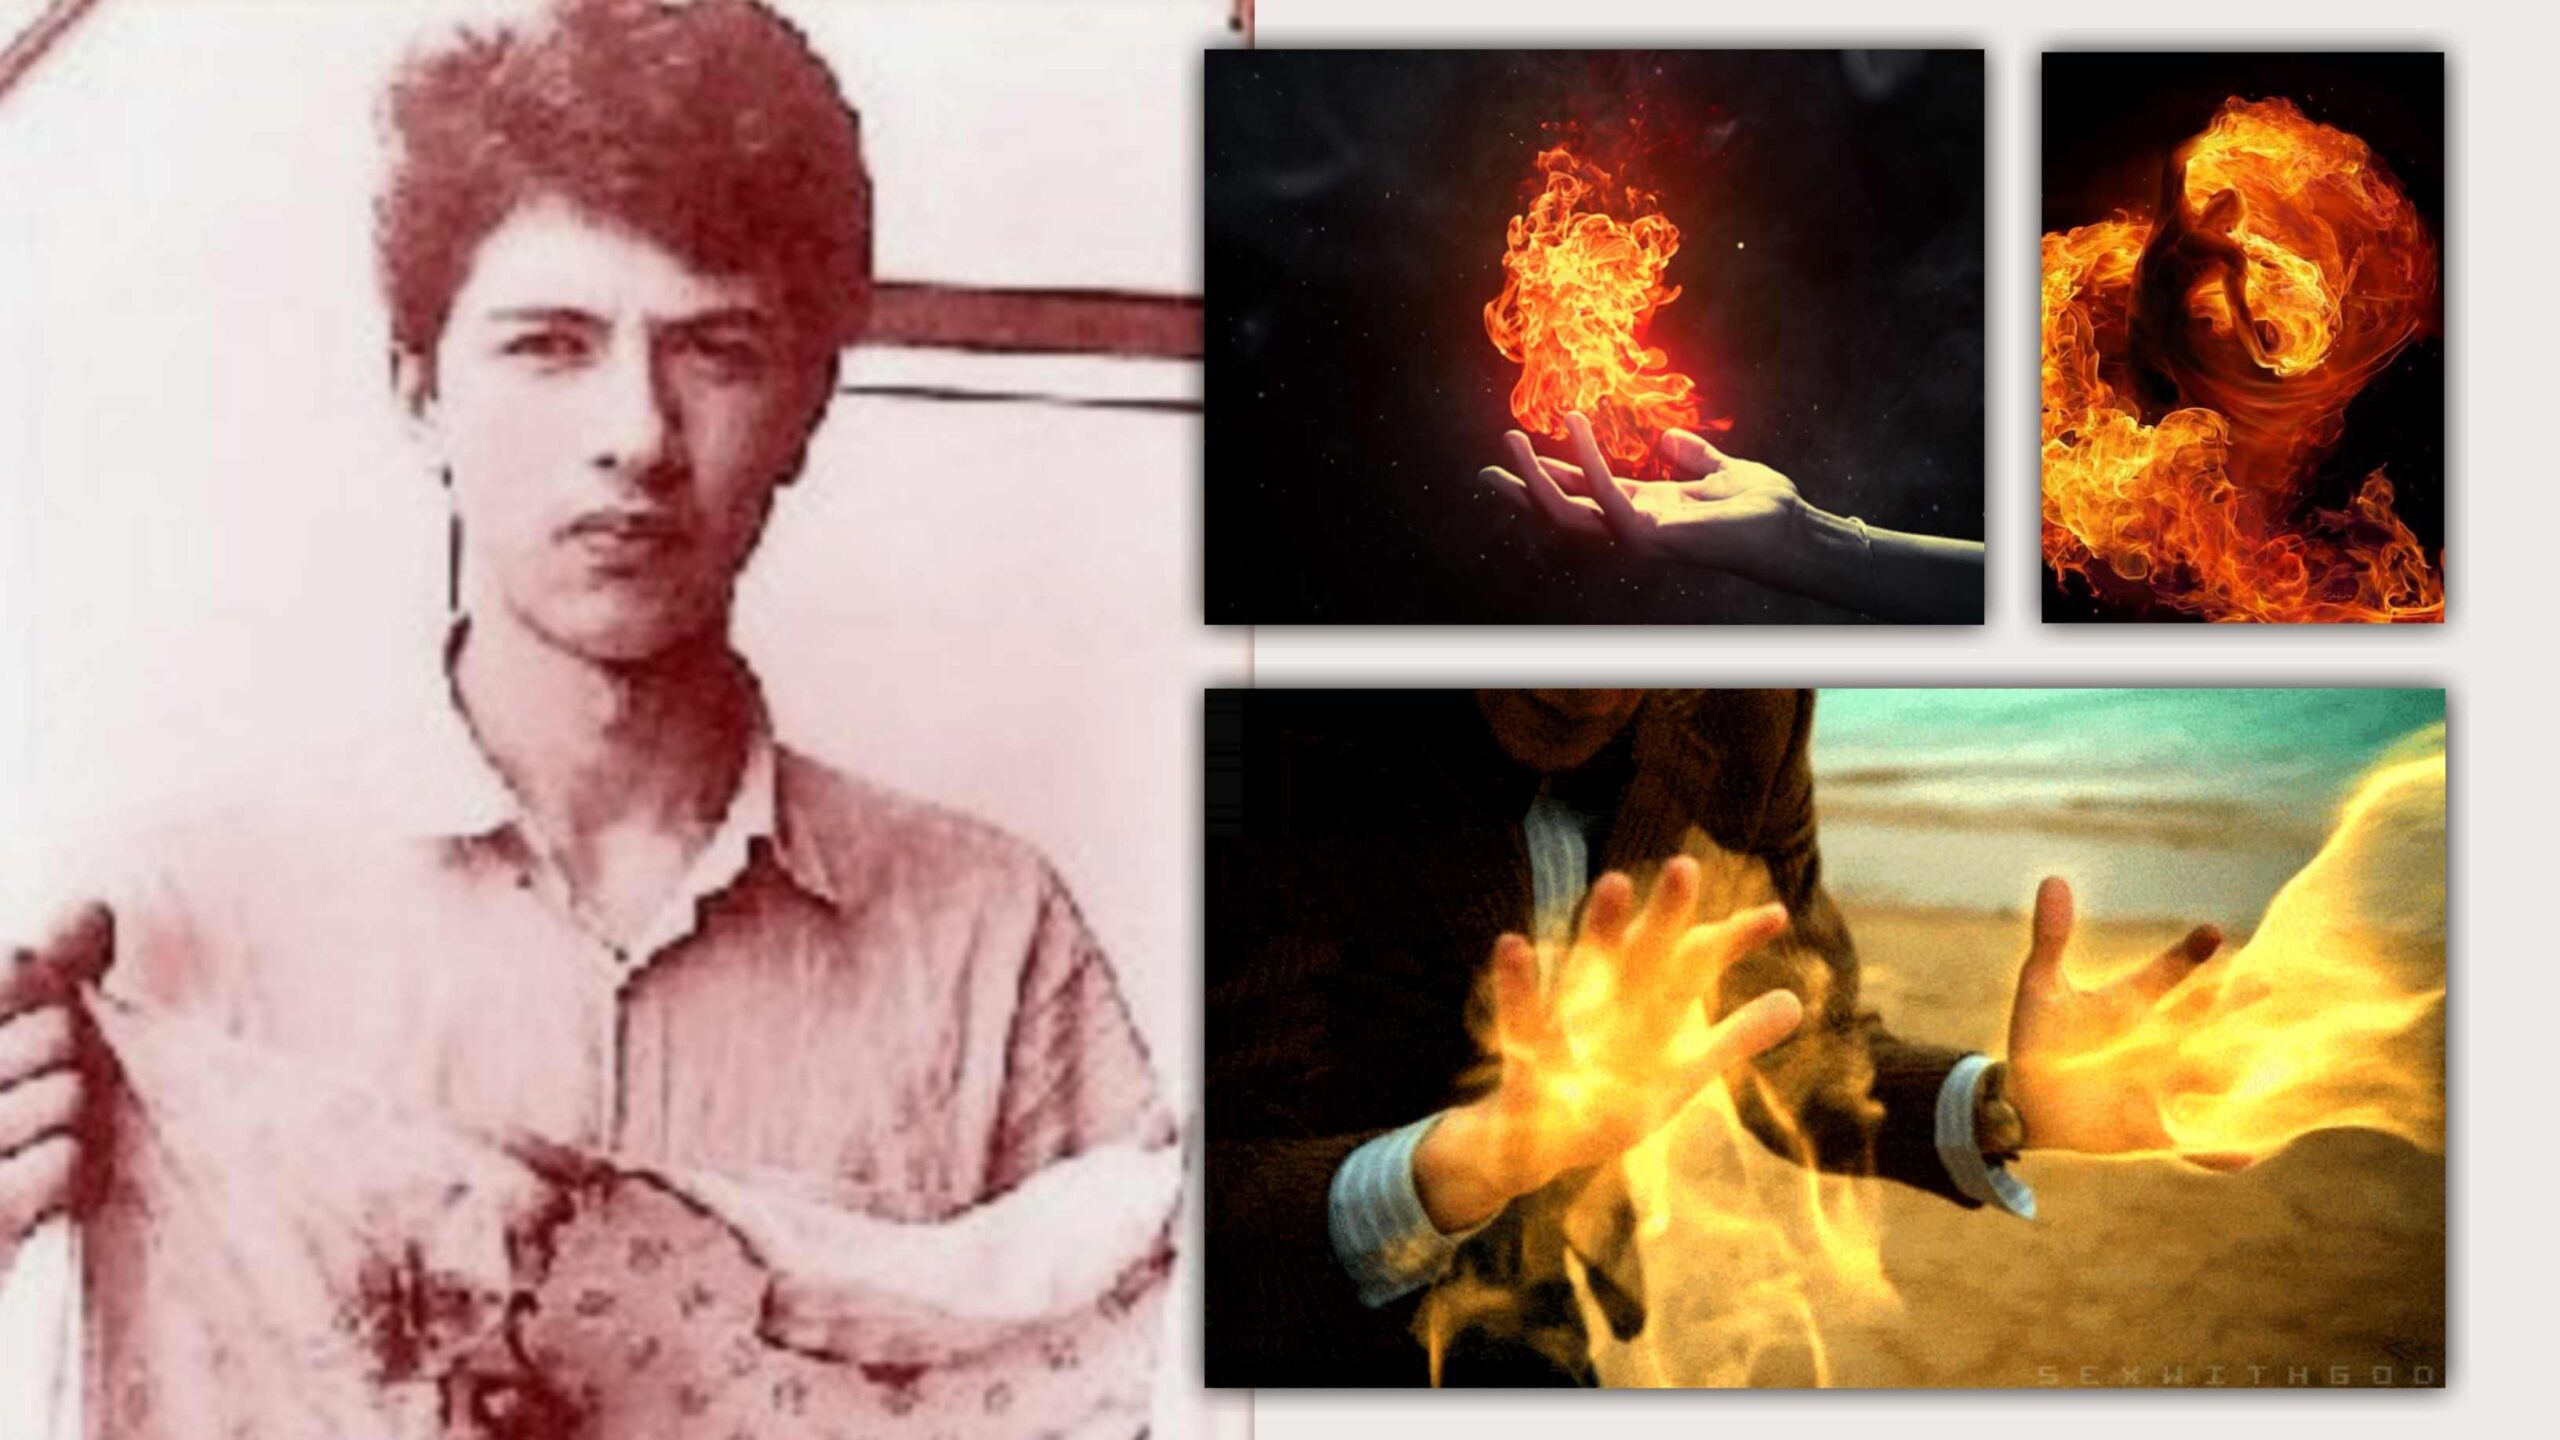 Benedetto Supino: An Italian boy who could set things 'ablaze' by staring at them 2